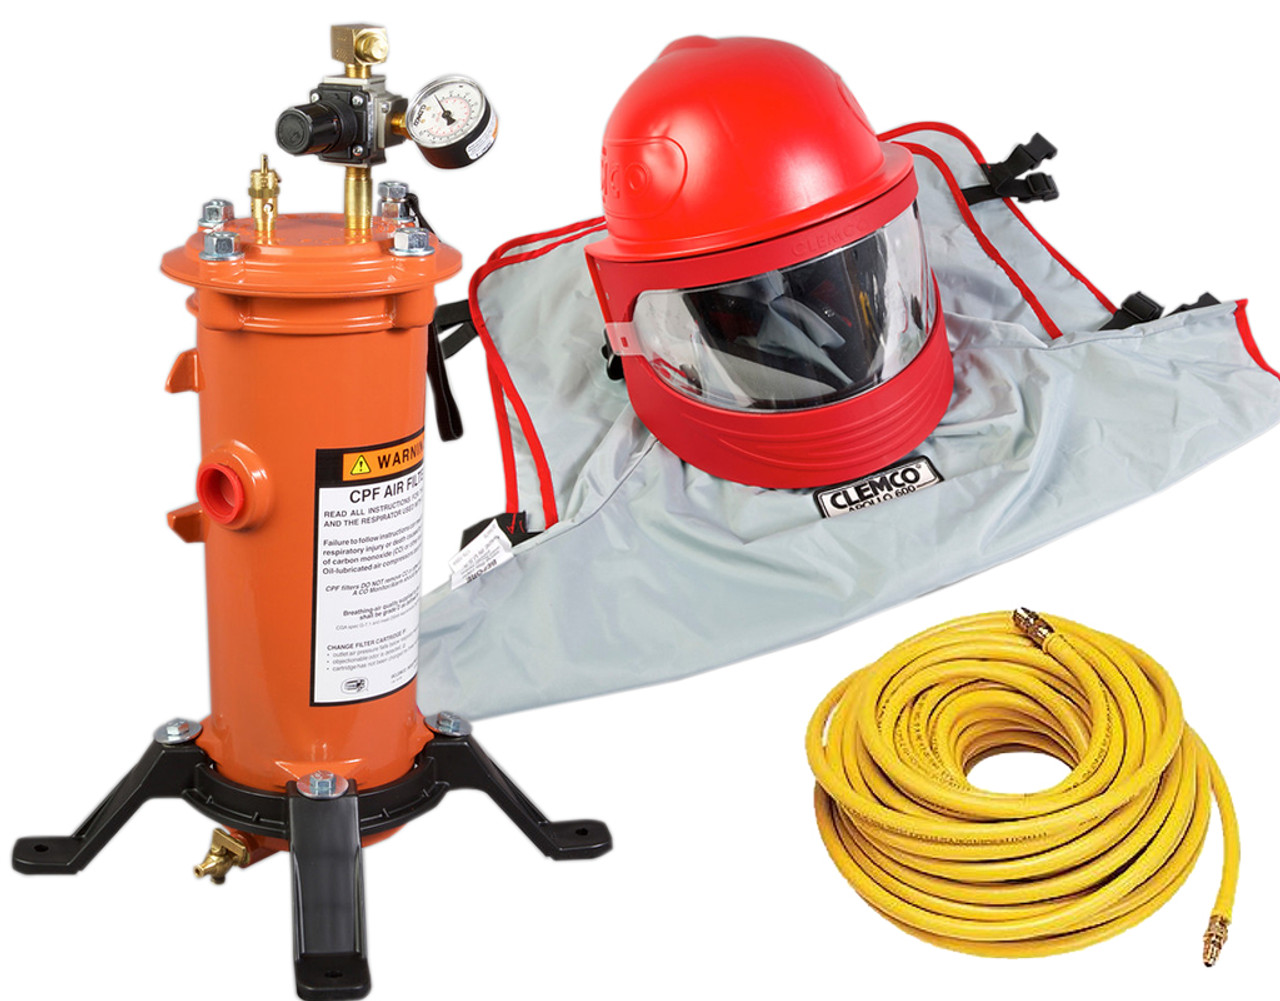 Protector HC 600 - Personal Protective Equipment Company